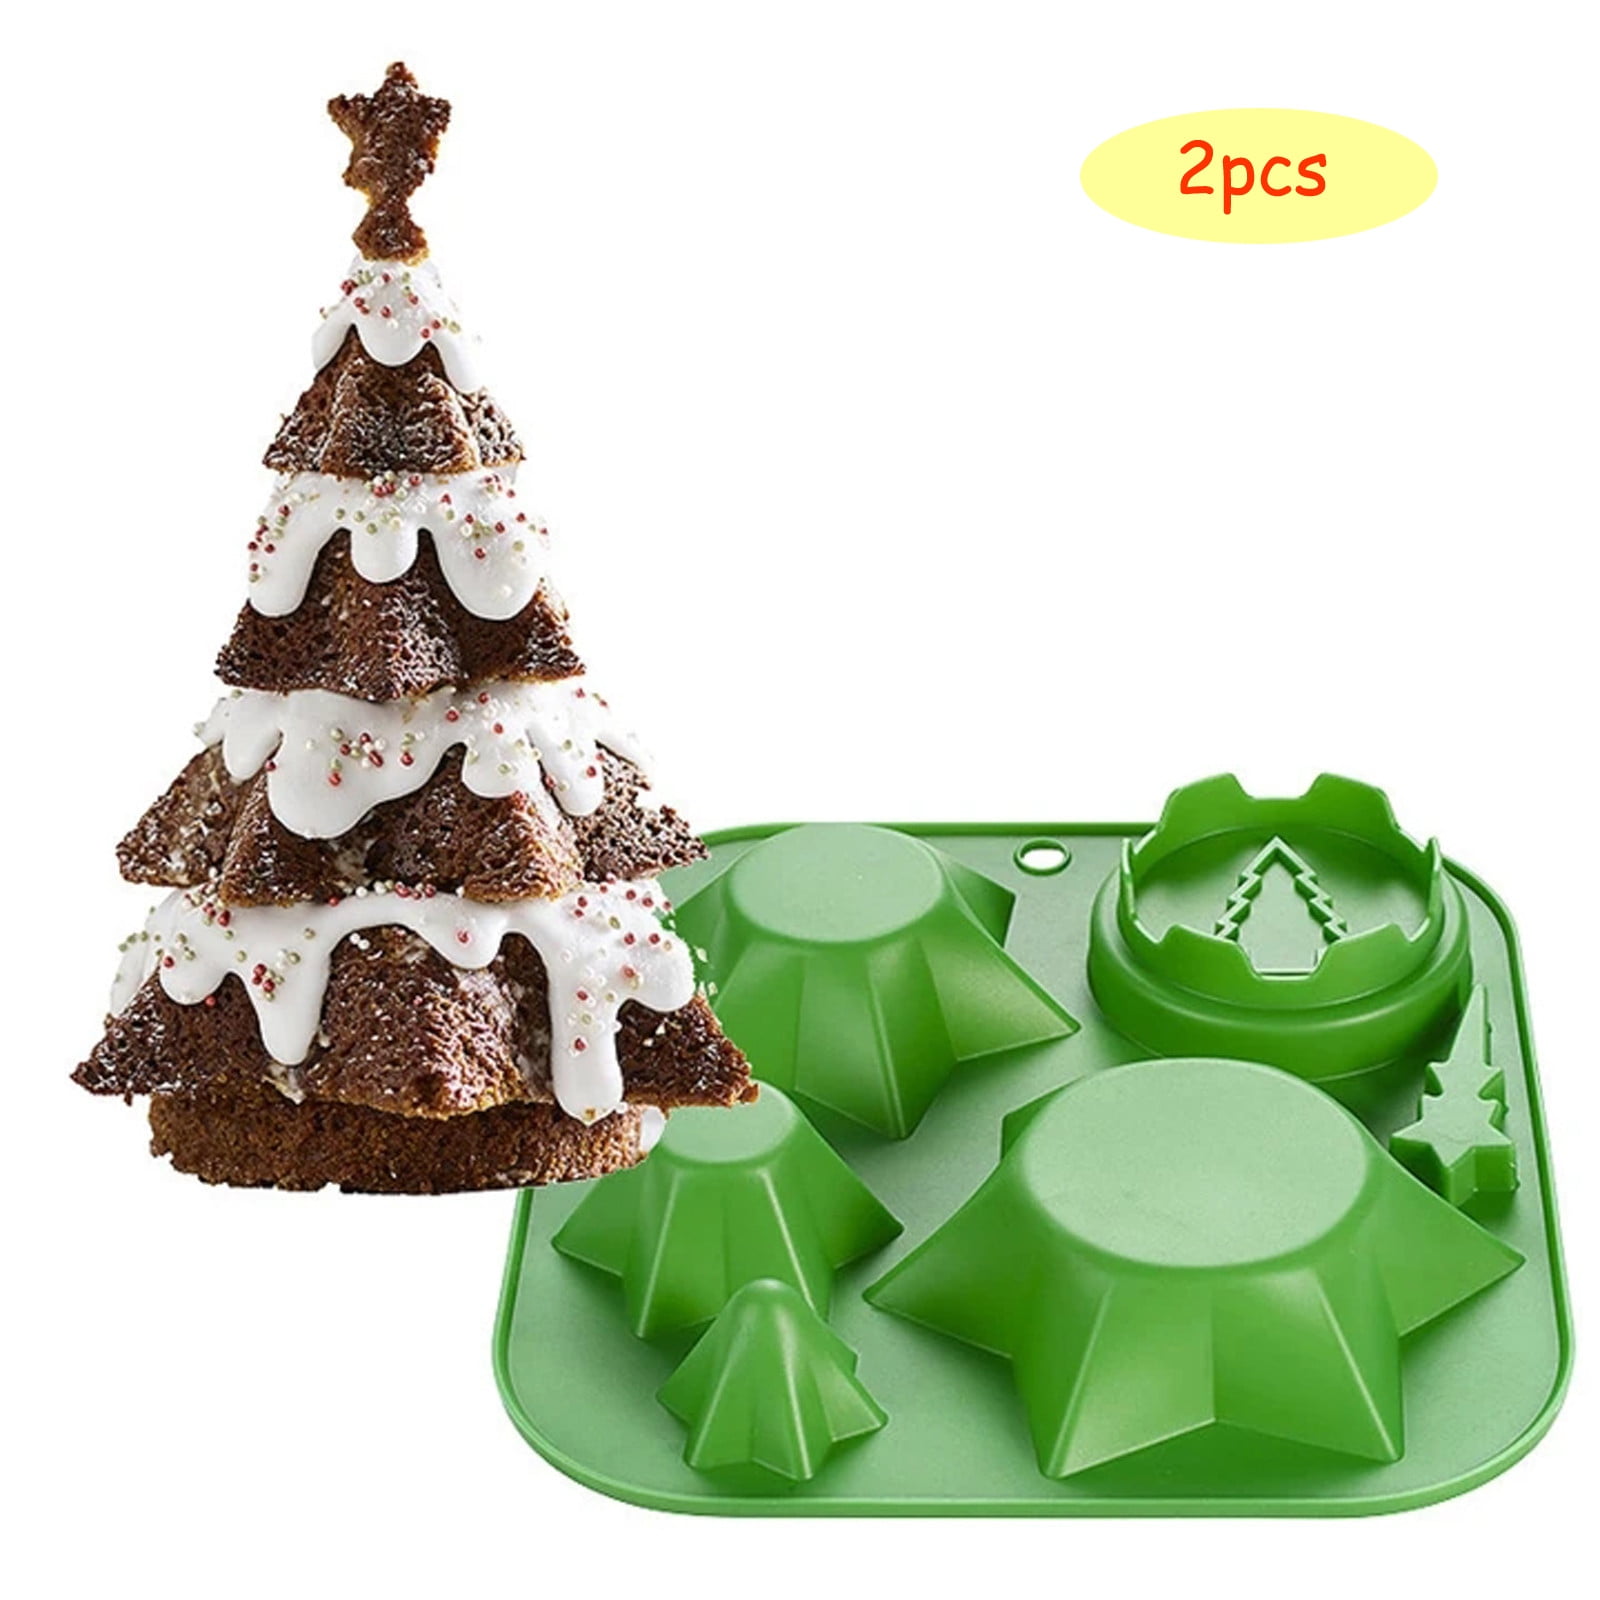 Christmas Style Santa Series Silicone Chocolate Rubber Concrete Molds Bar  Mould Cake Mold Ice Tray Cake Decorating Tools From Flyw201264, $2.38